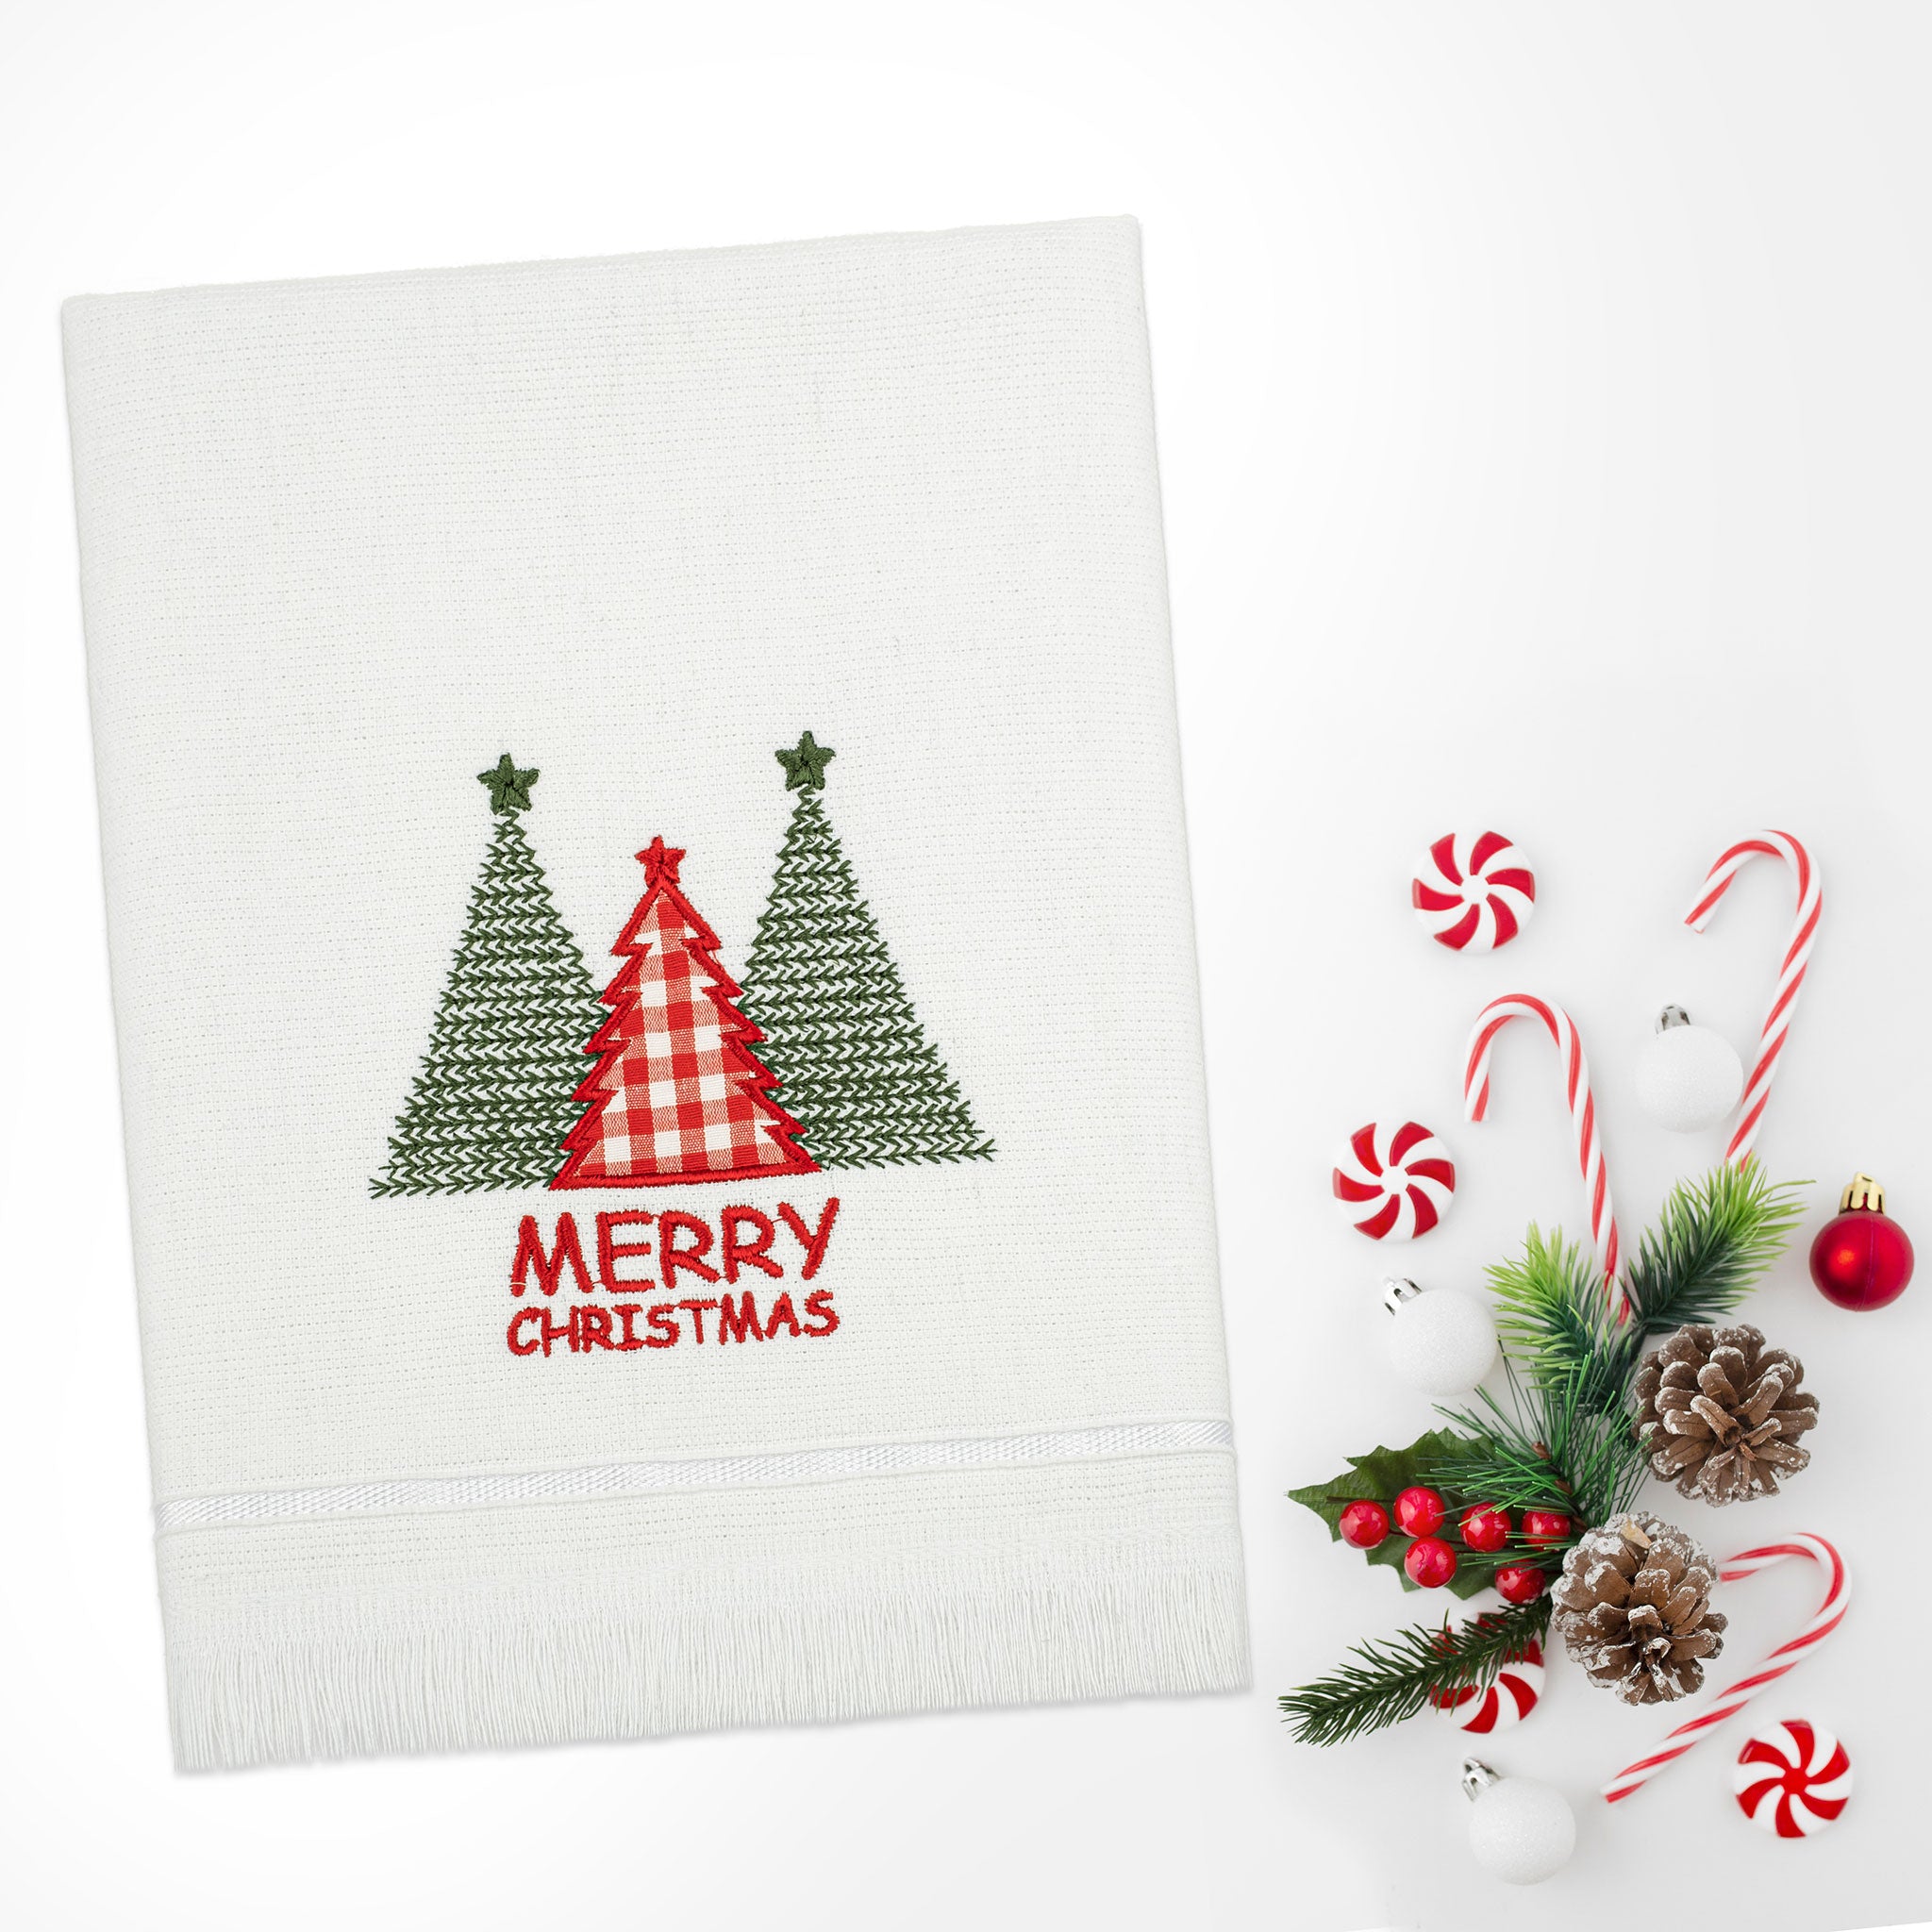  American Soft Linen - Christmas Towels Set 2 Packed Embroidered Turkish Cotton Hand Towels - Christmas Tree Socks - 6